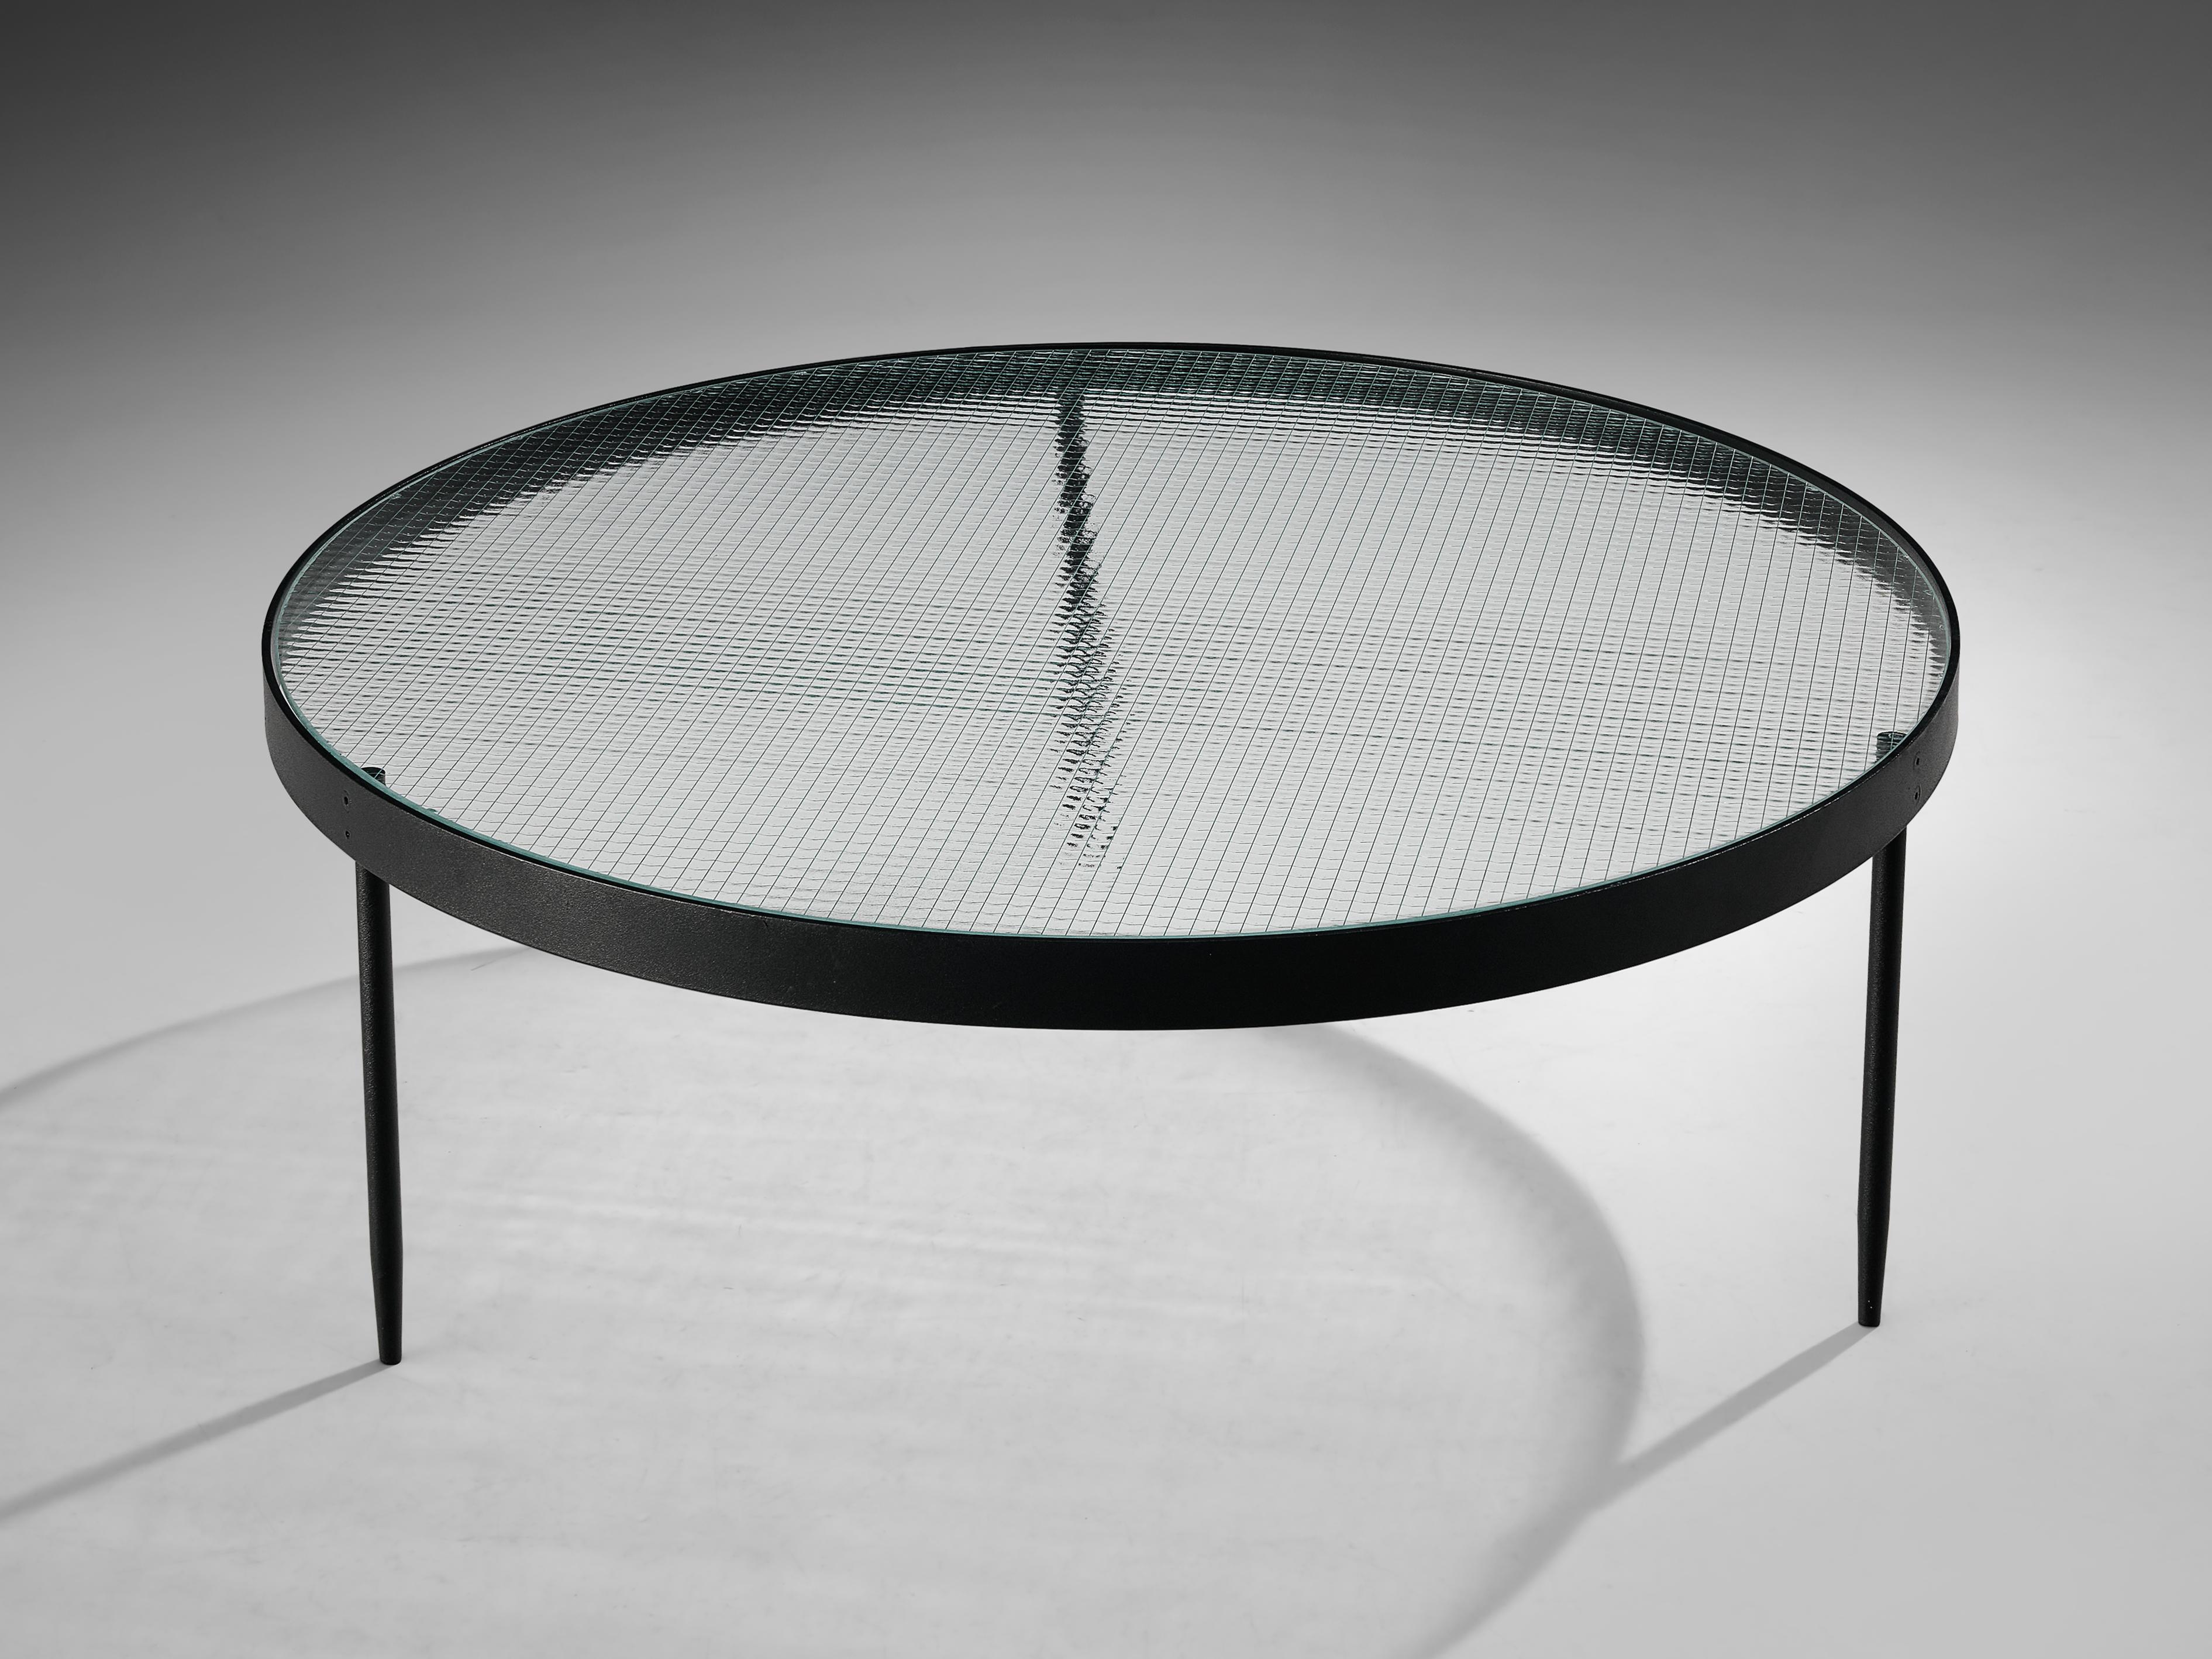 Janni Van Pelt for Bas Van Pelt, coffee table, glass and black metal, the Netherlands, 1950s. 

Round coffee table in black coated metal and glass. This table is the model G4. The base consists of four legs with a cross-connection. The top is made